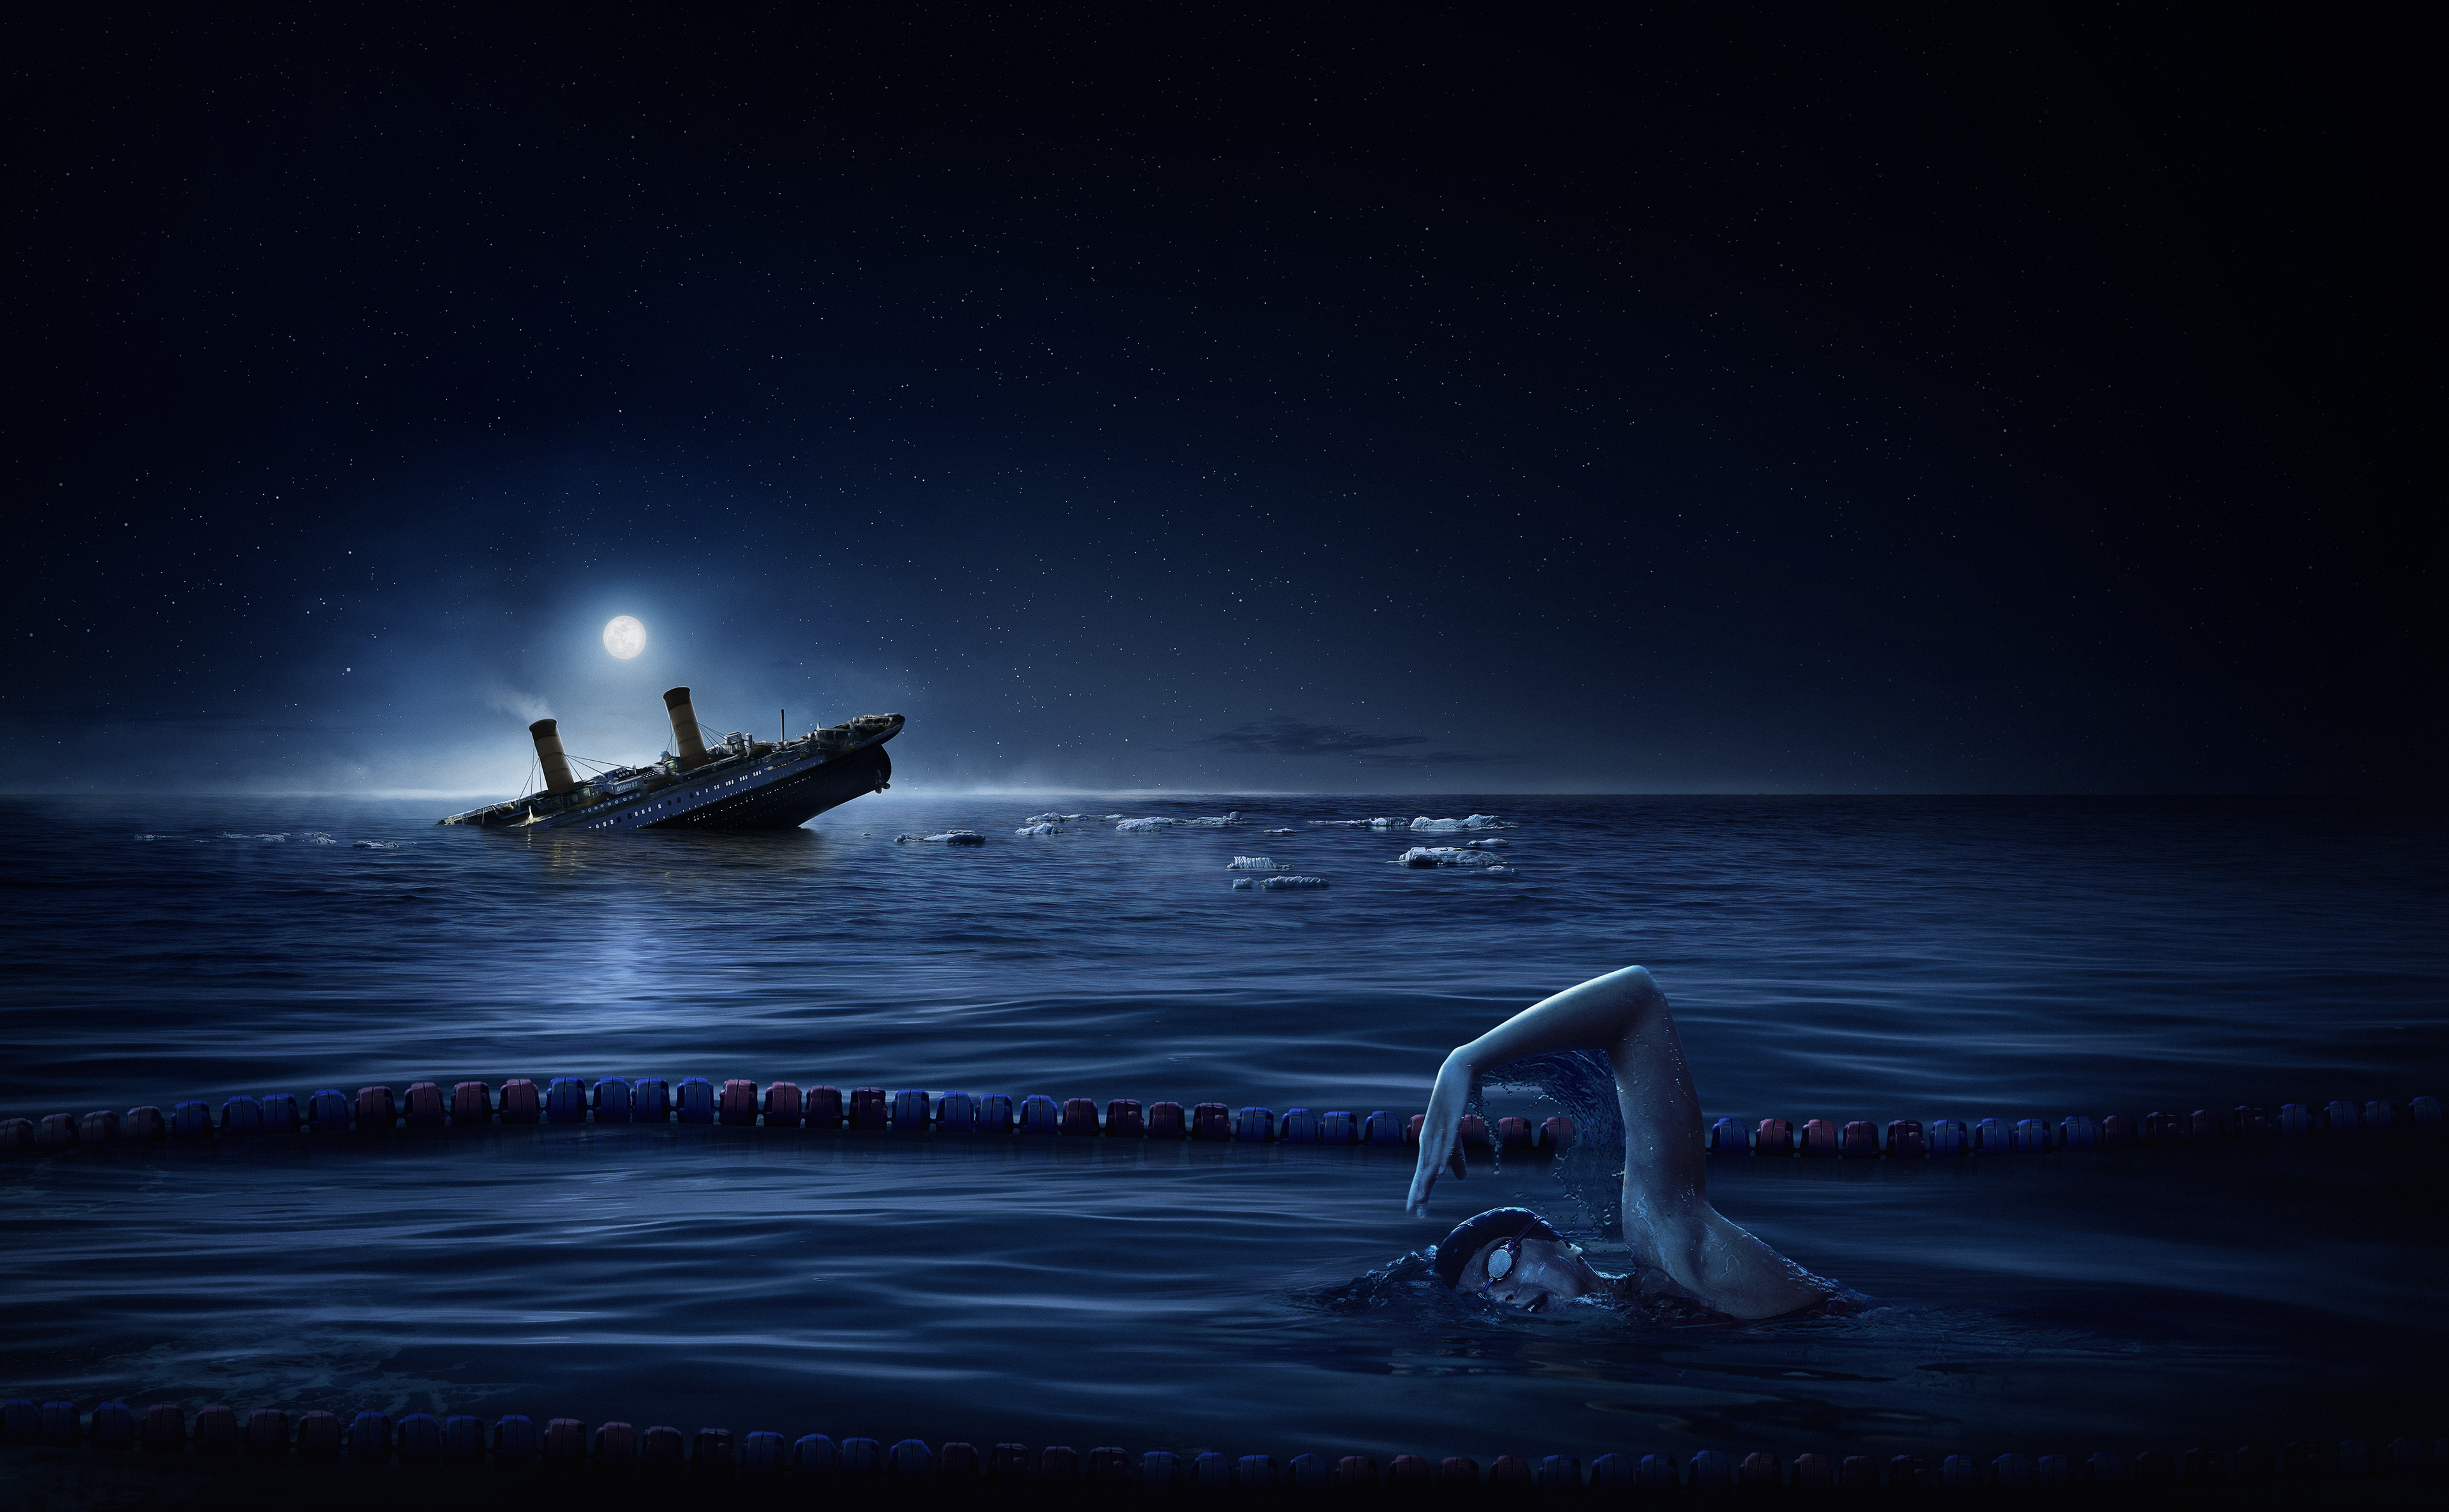 Titanic ship alongside swimmer hd artist k wallpapers images backgrounds photos and pictures